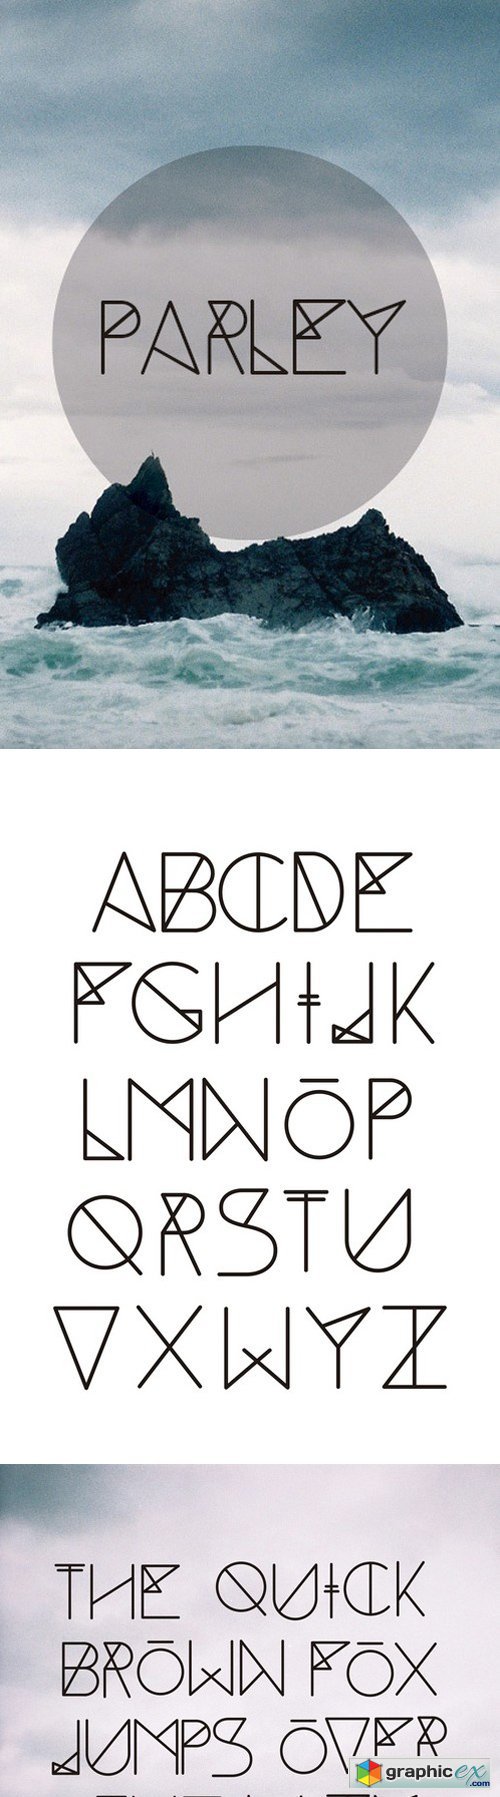 Parley typeface